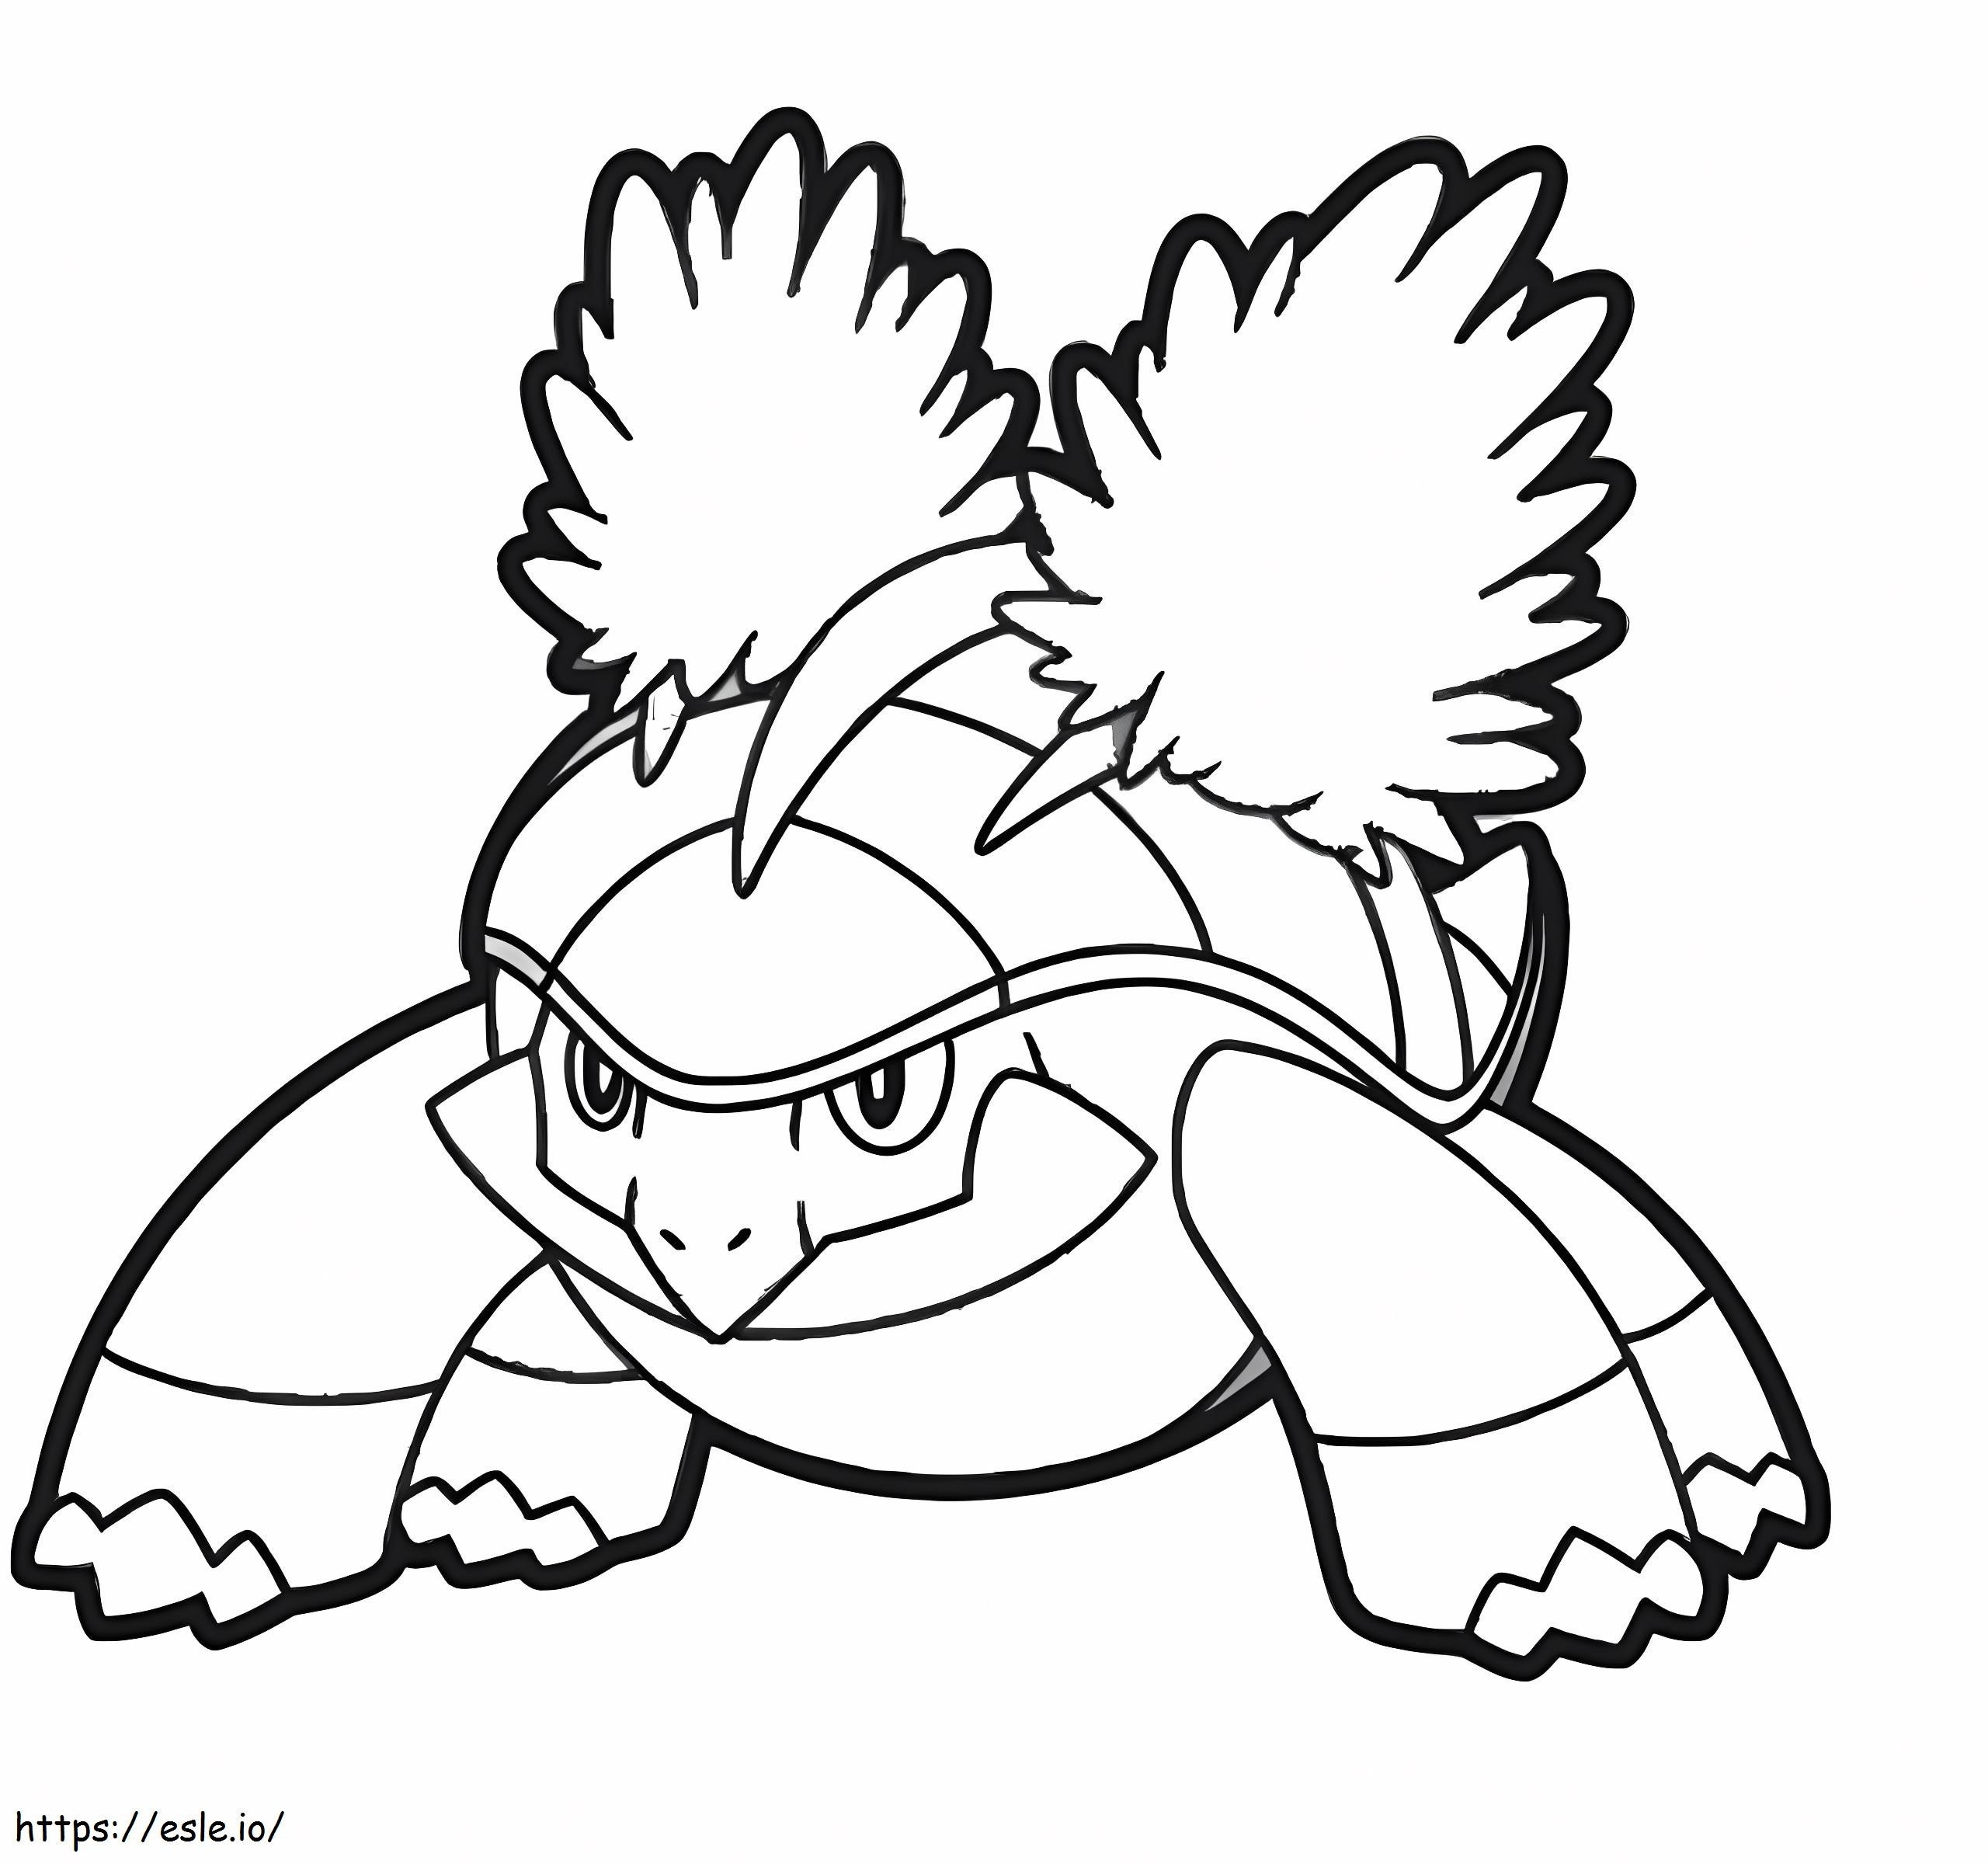 Grotle gen pokemon coloring page